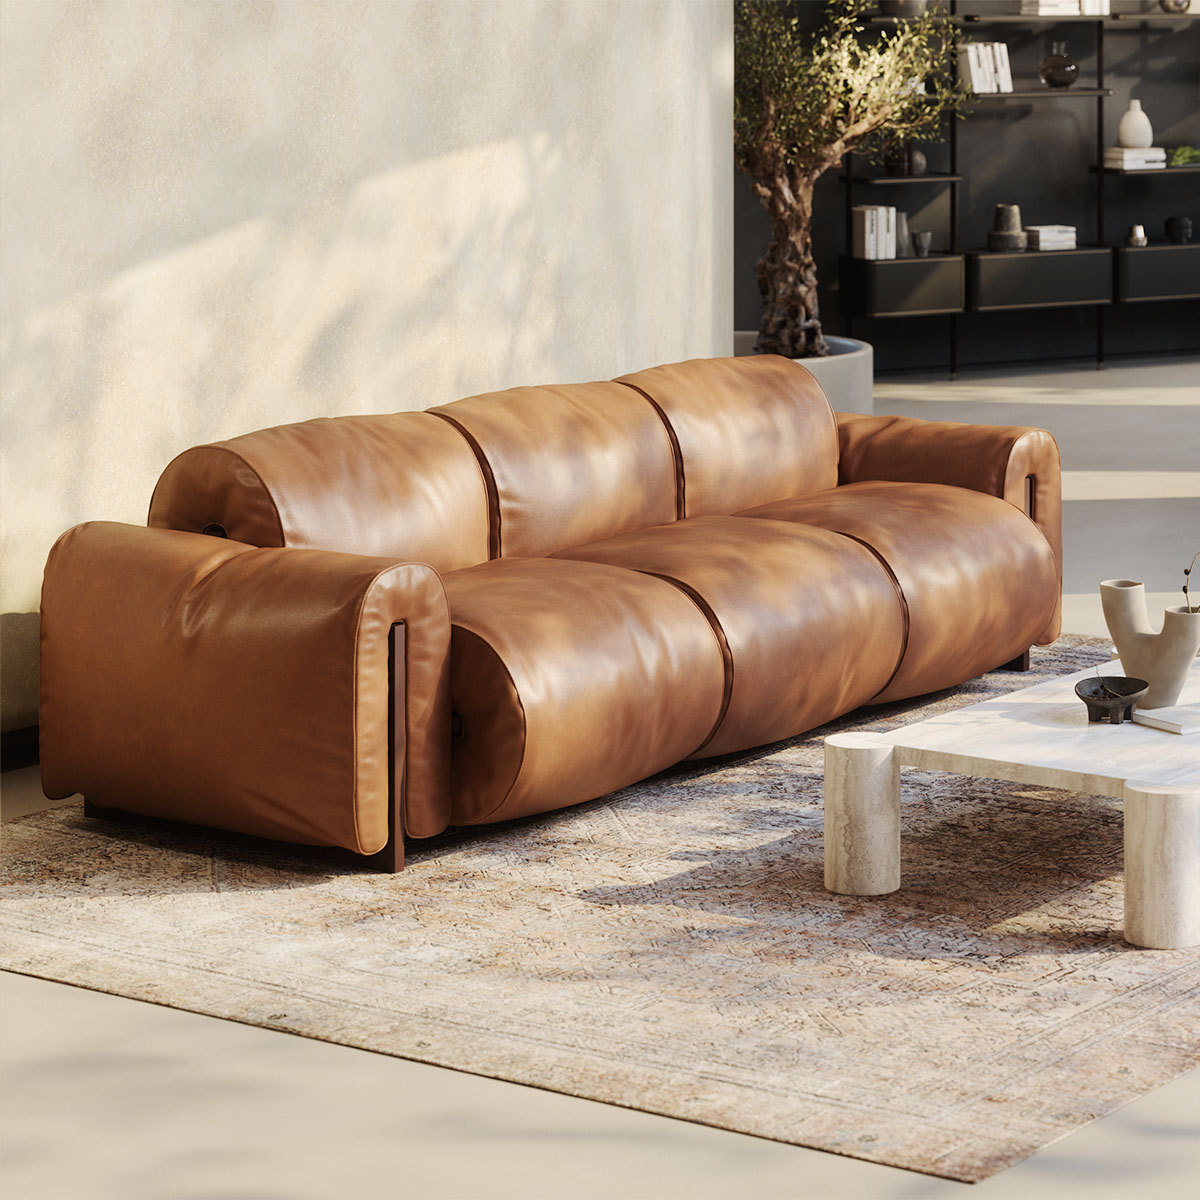 Natuzzi editorial - Colle by BIG — Bjarke Ingels Group